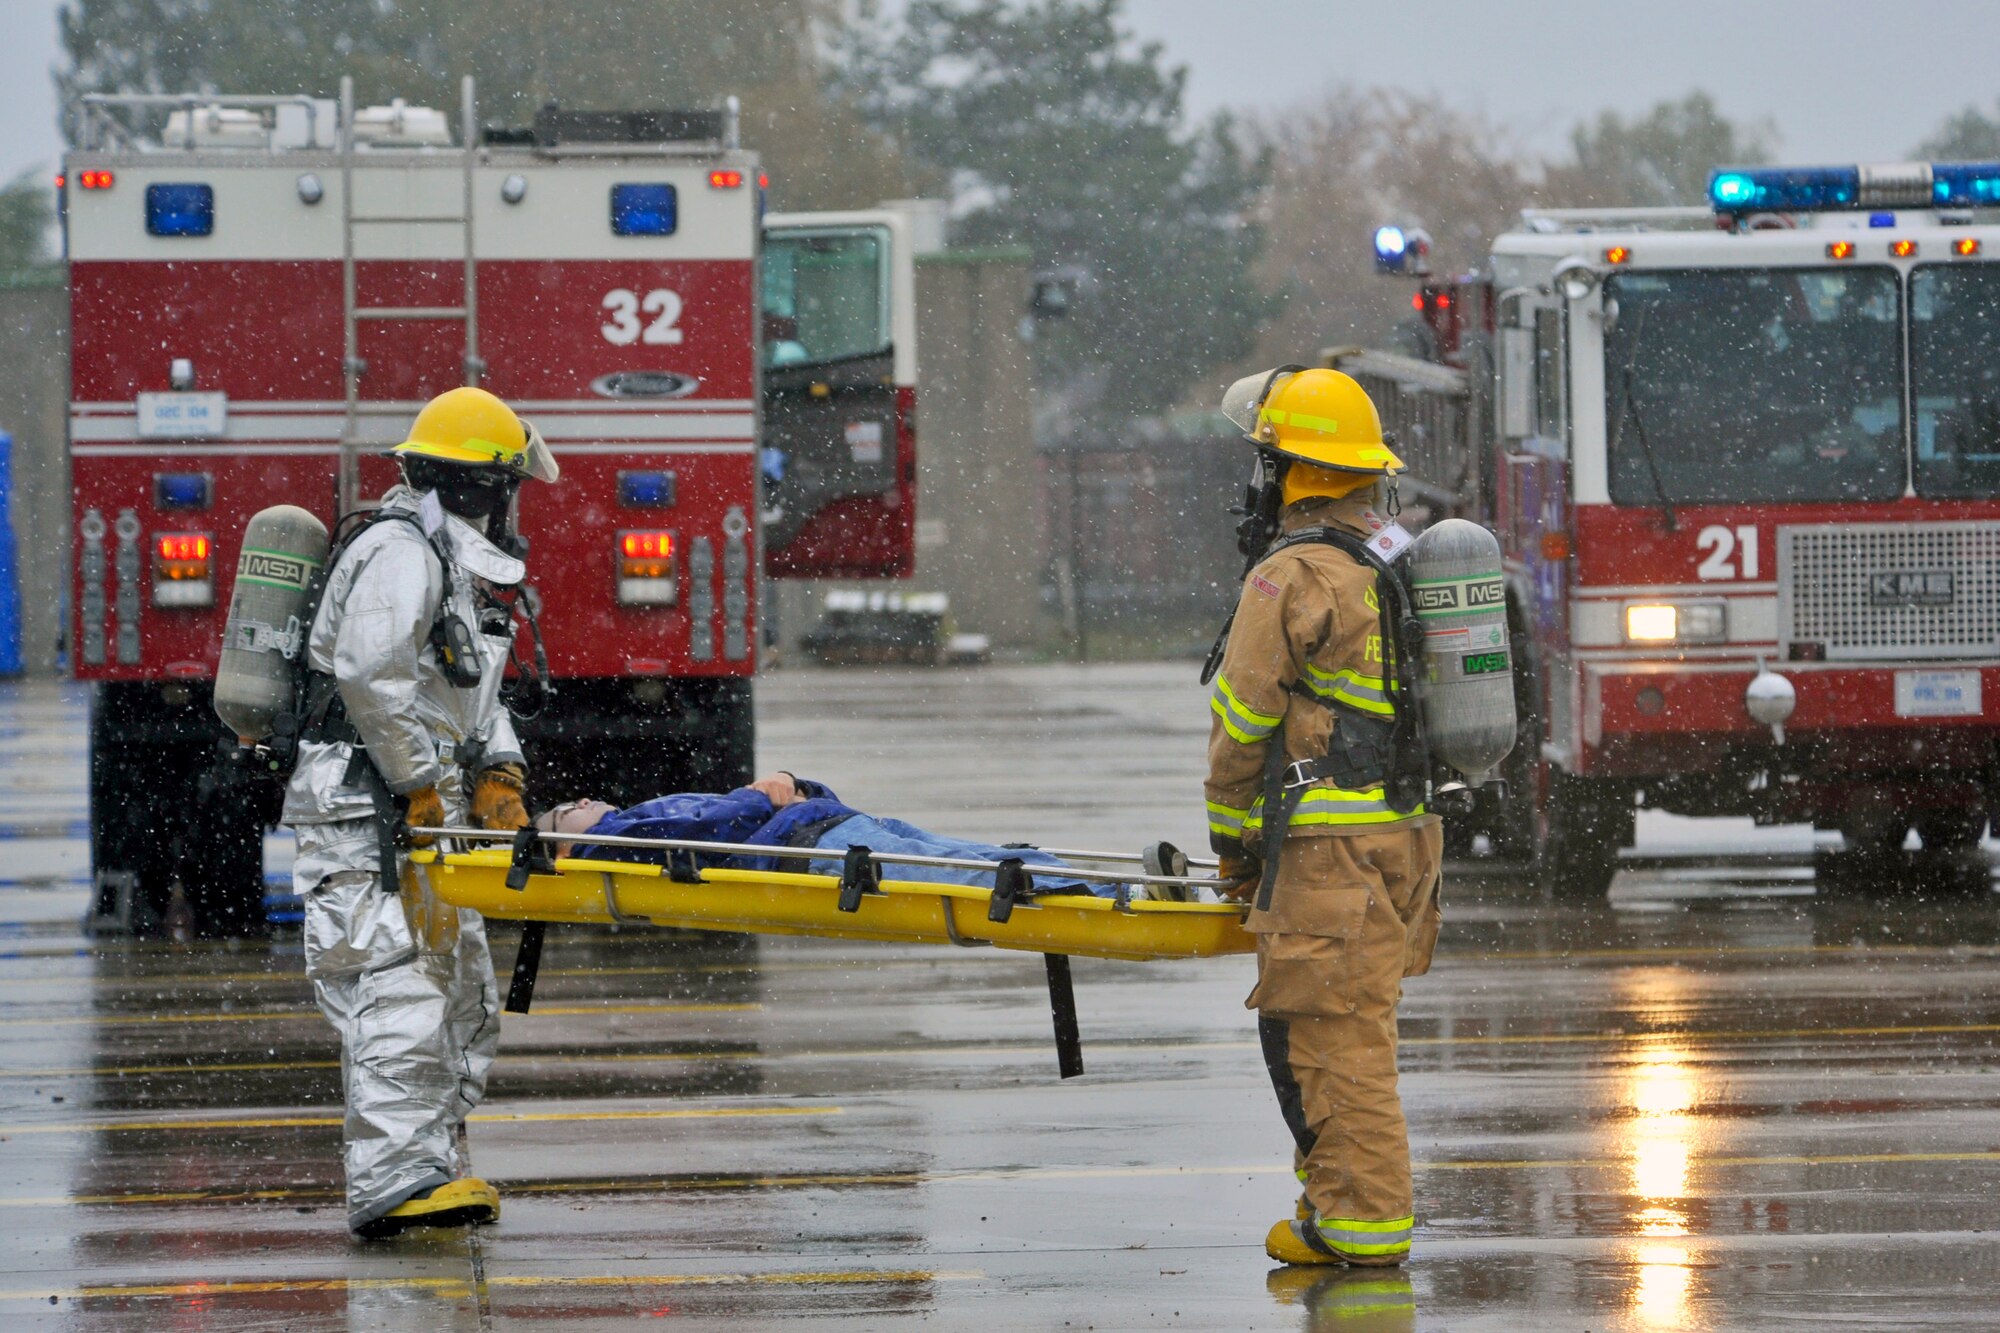 Firefighters with the 886th Civil Engineer Squadron transport a ‘victim’ during a major accident response exercise, Rhine Ordnance Barracks, Oct. 27. The exercise tested various units’ ability to respond to a major accident and their aptitude to work together to handle assorted challenges that may arise during a crisis response. (U.S. Air Force photo/Airman 1st Class Trevor Rhynes)